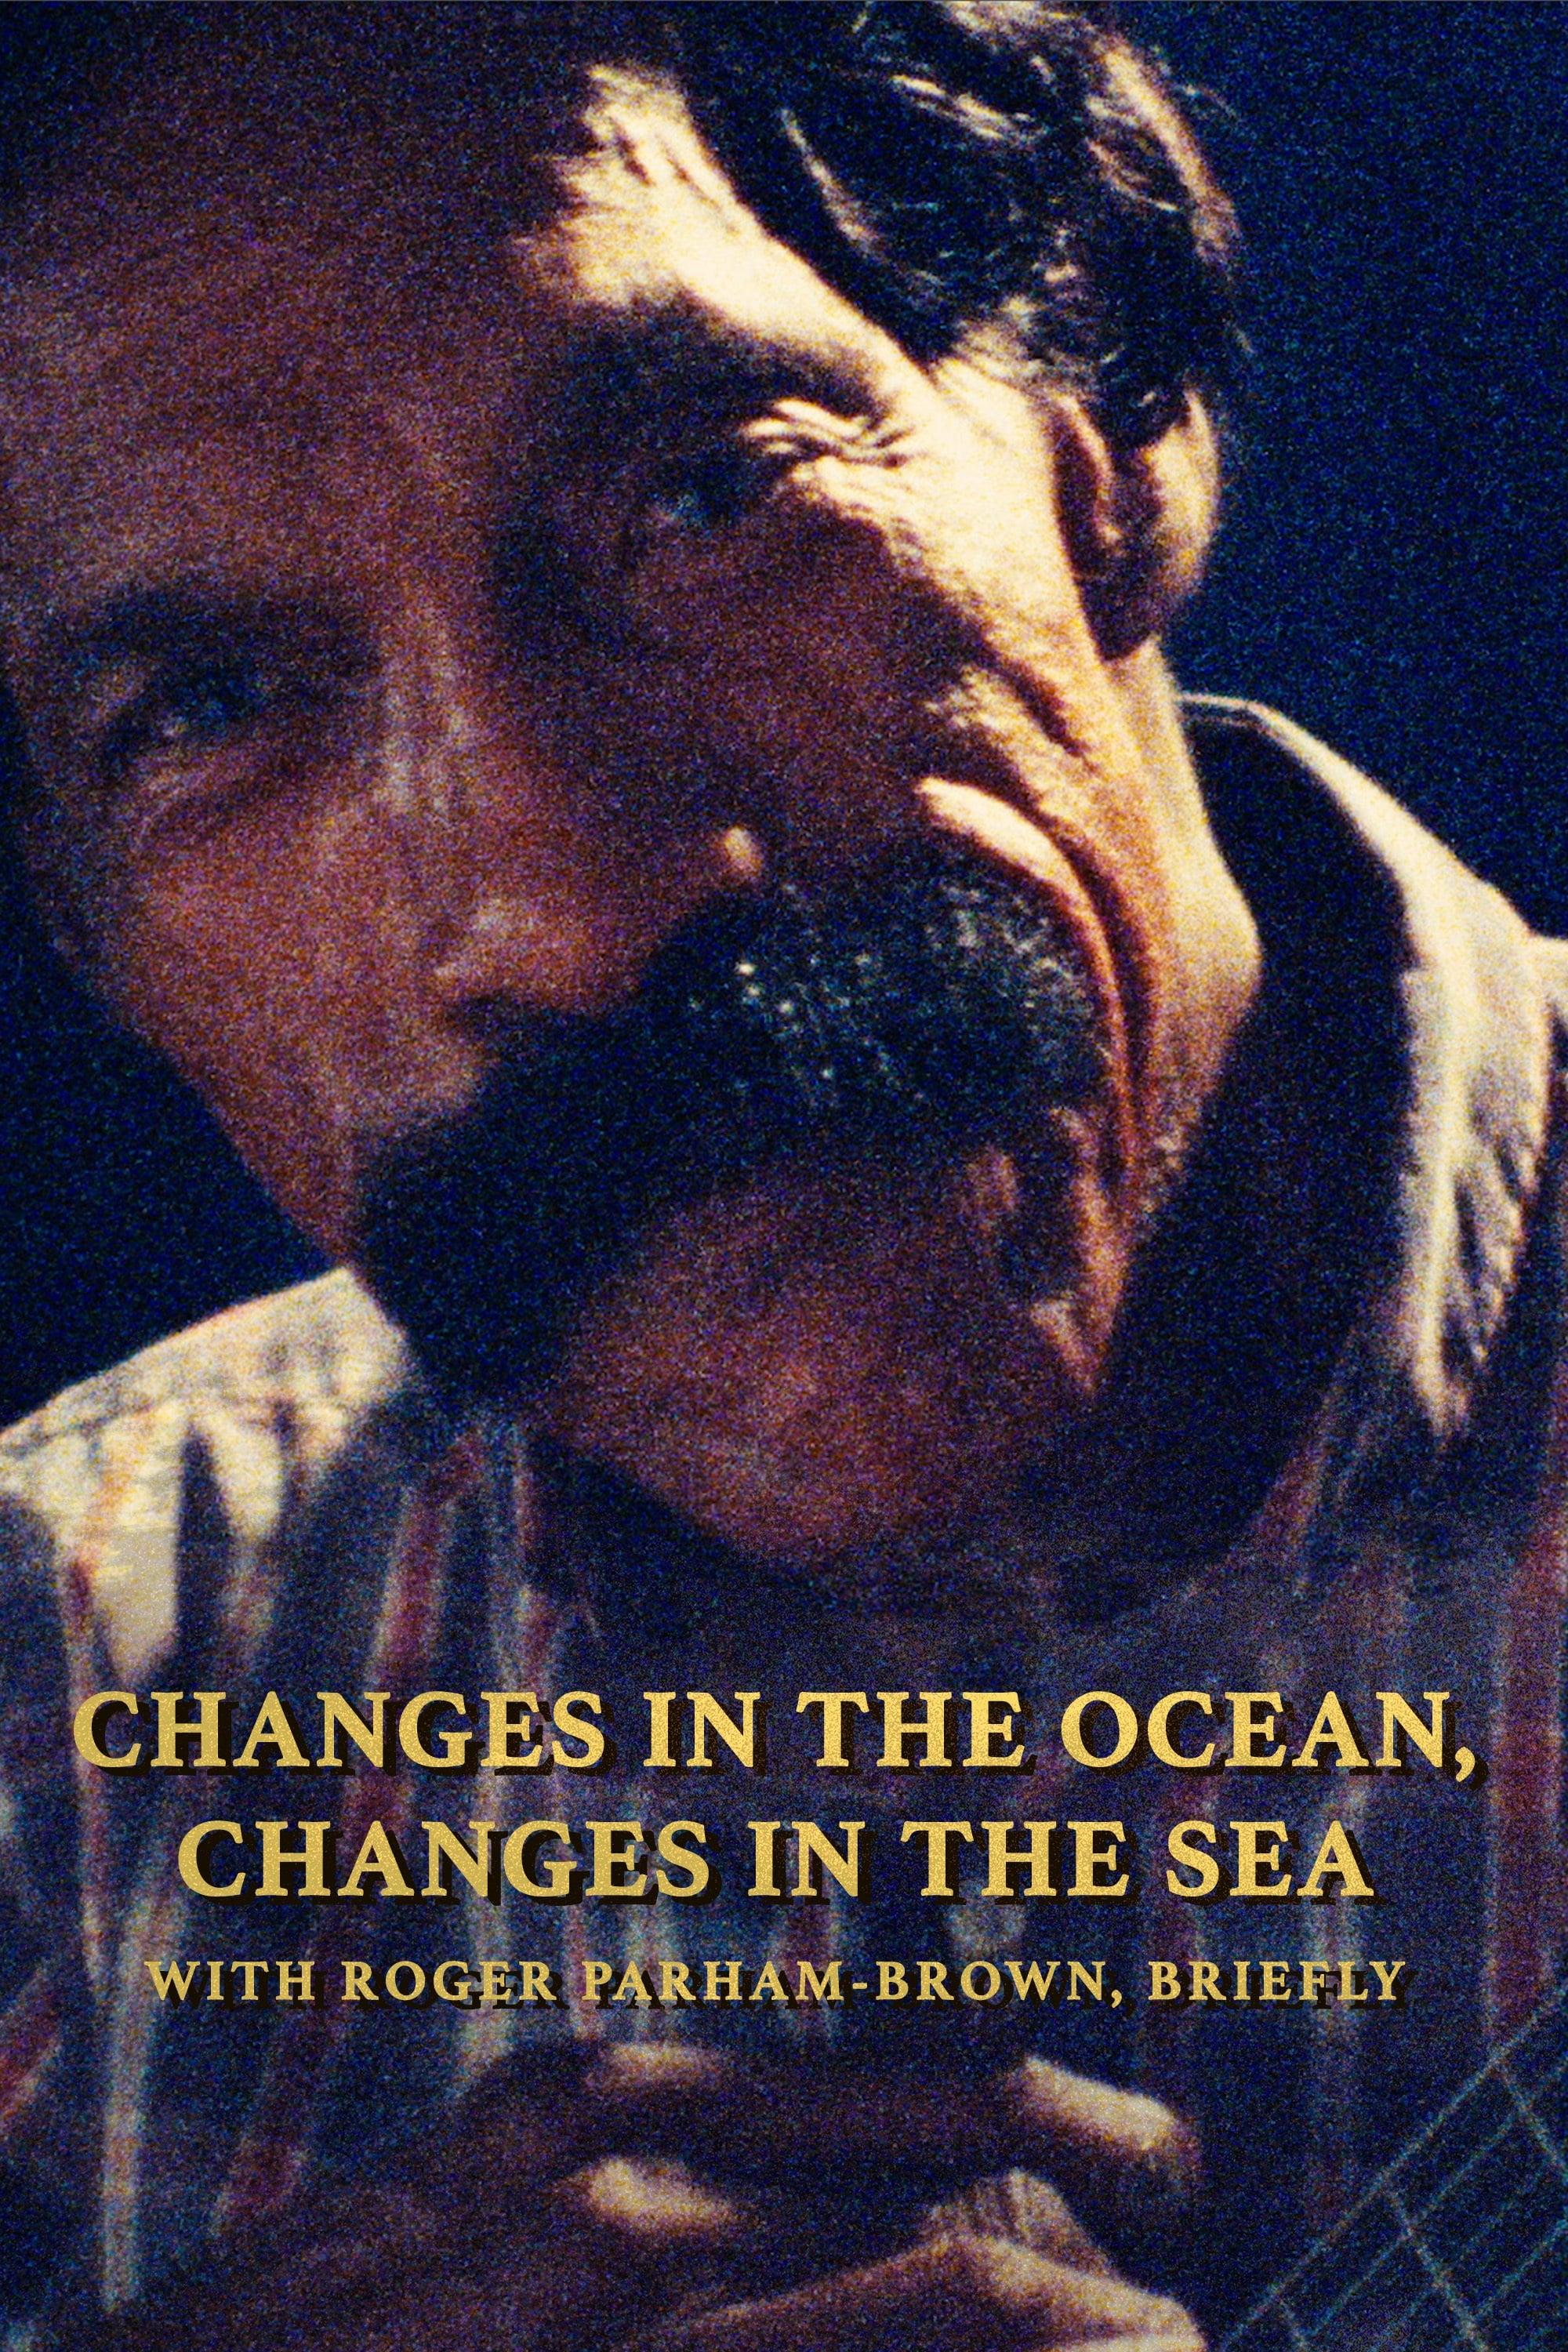 Changes in the Ocean, Changes in the Sea